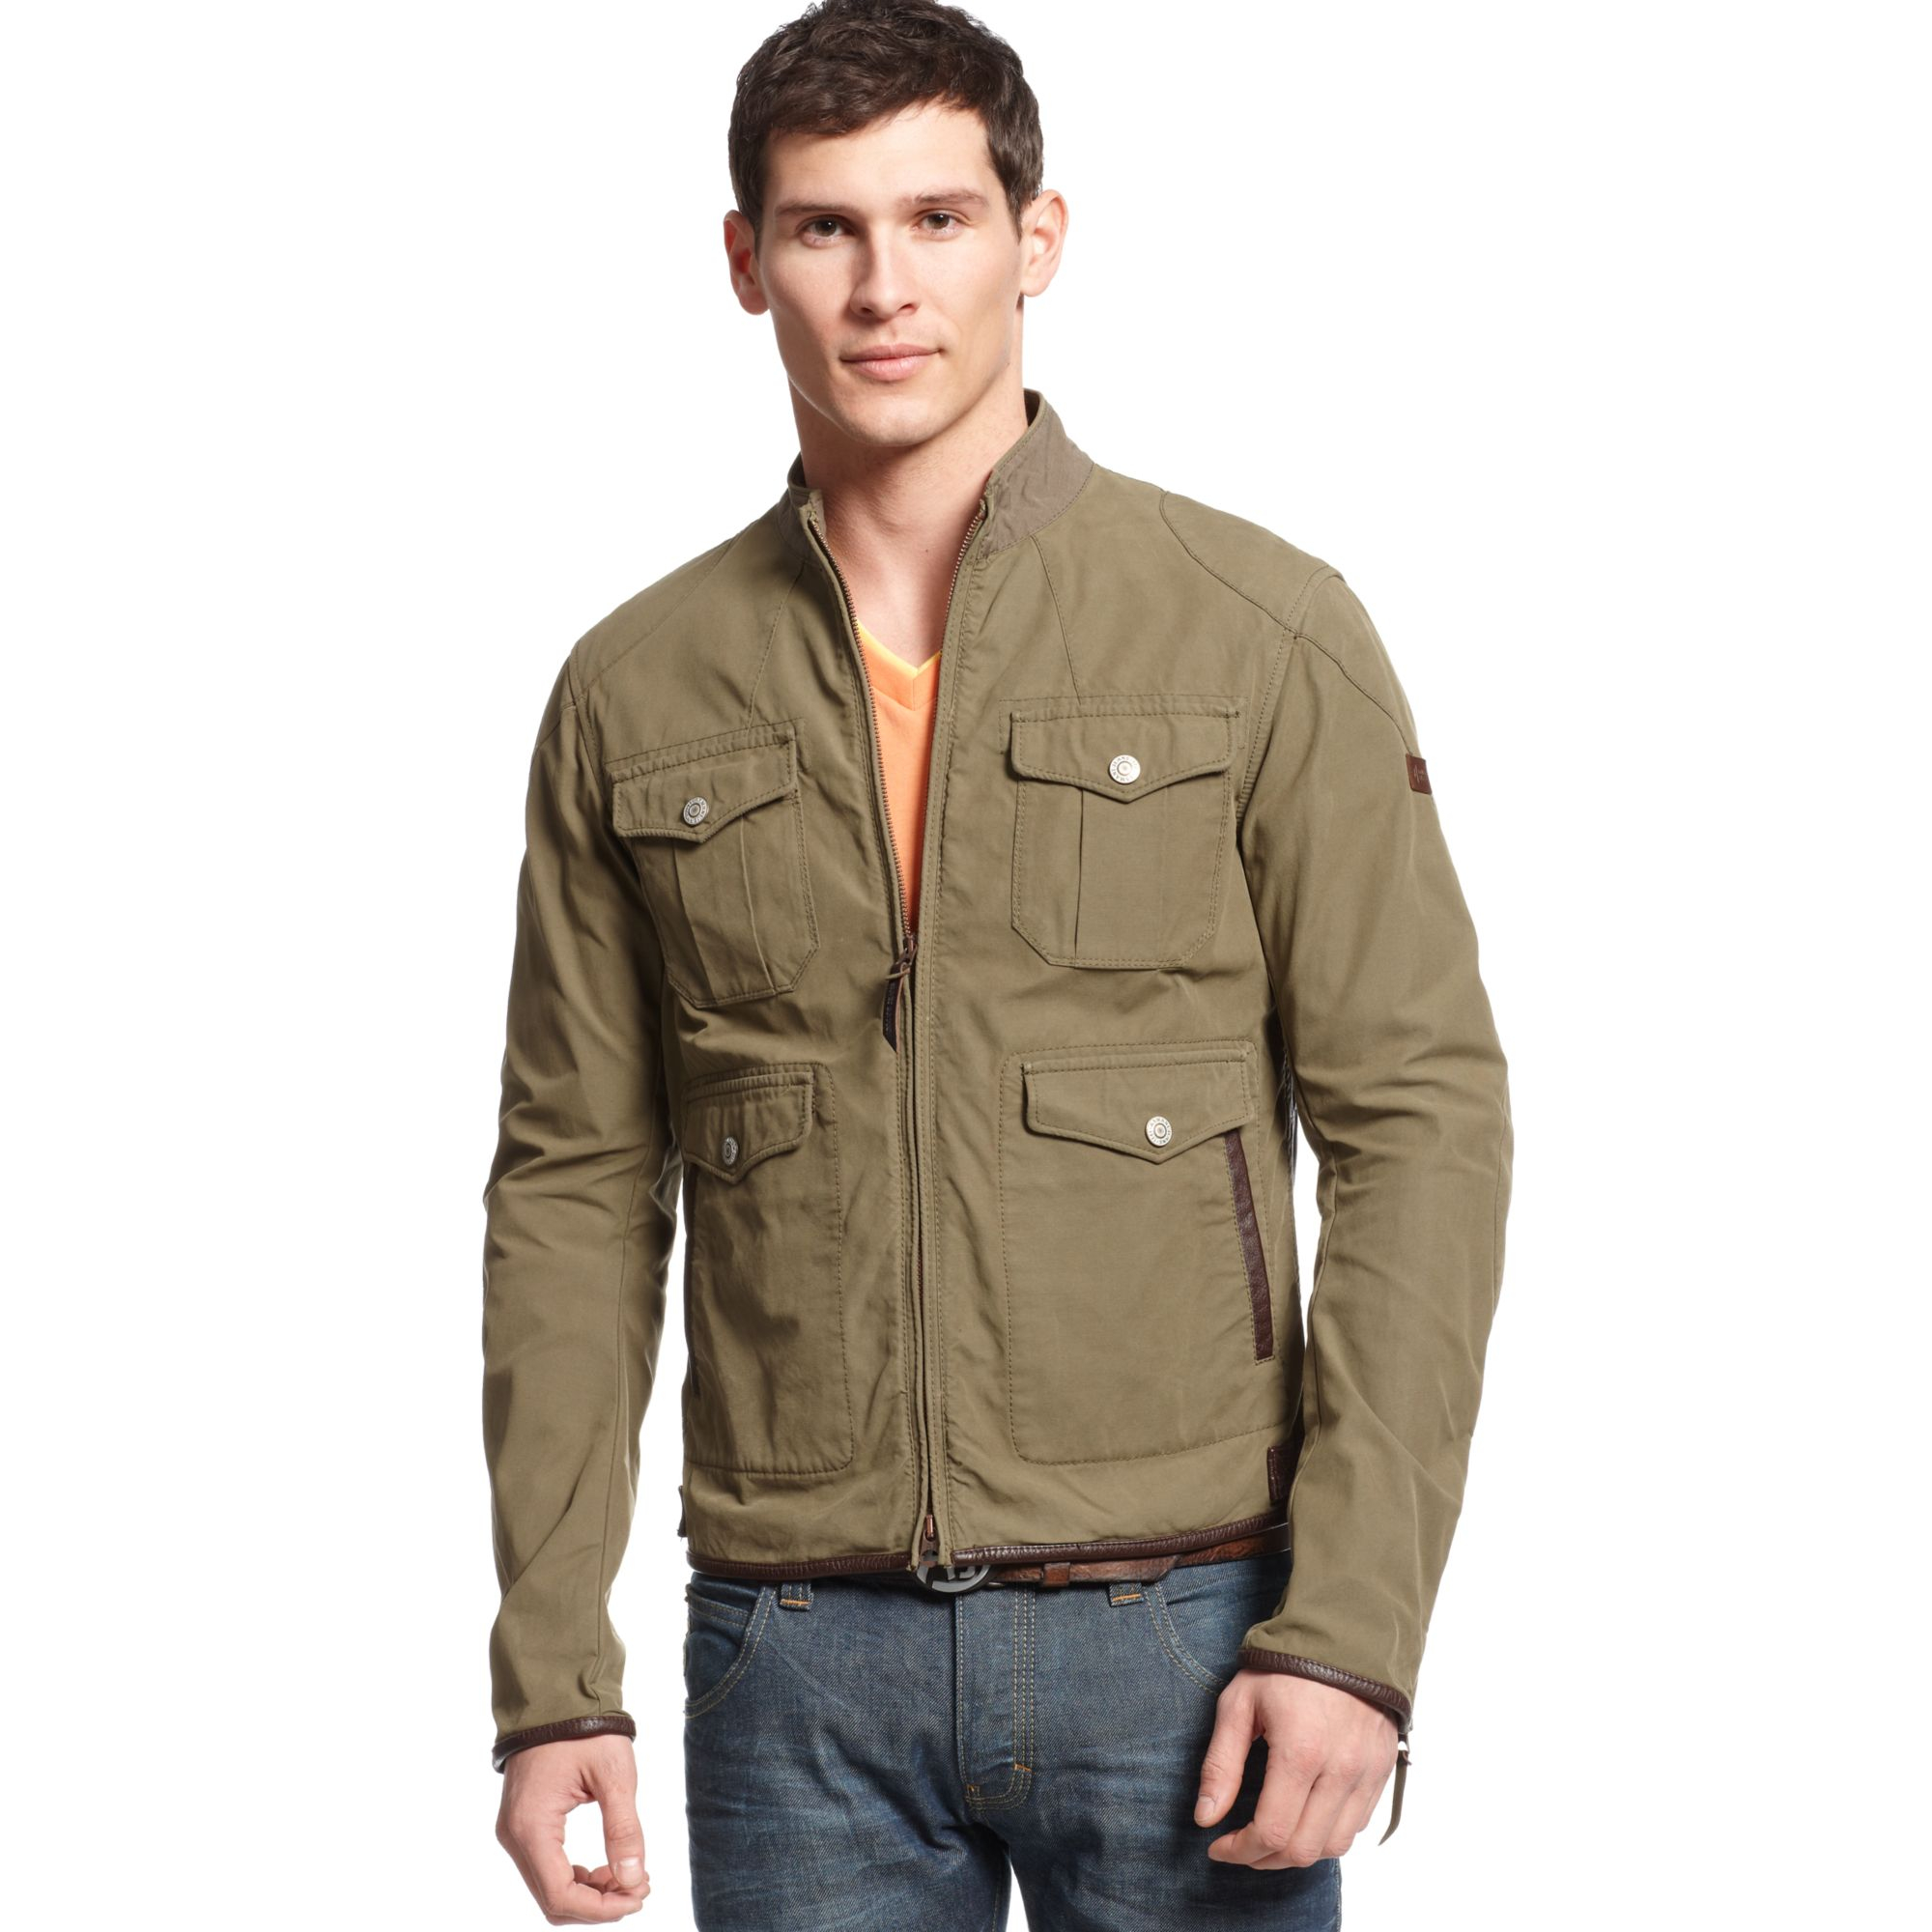 Lyst - Armani jeans Leathertrimmed Canvas Jacket in Natural for Men